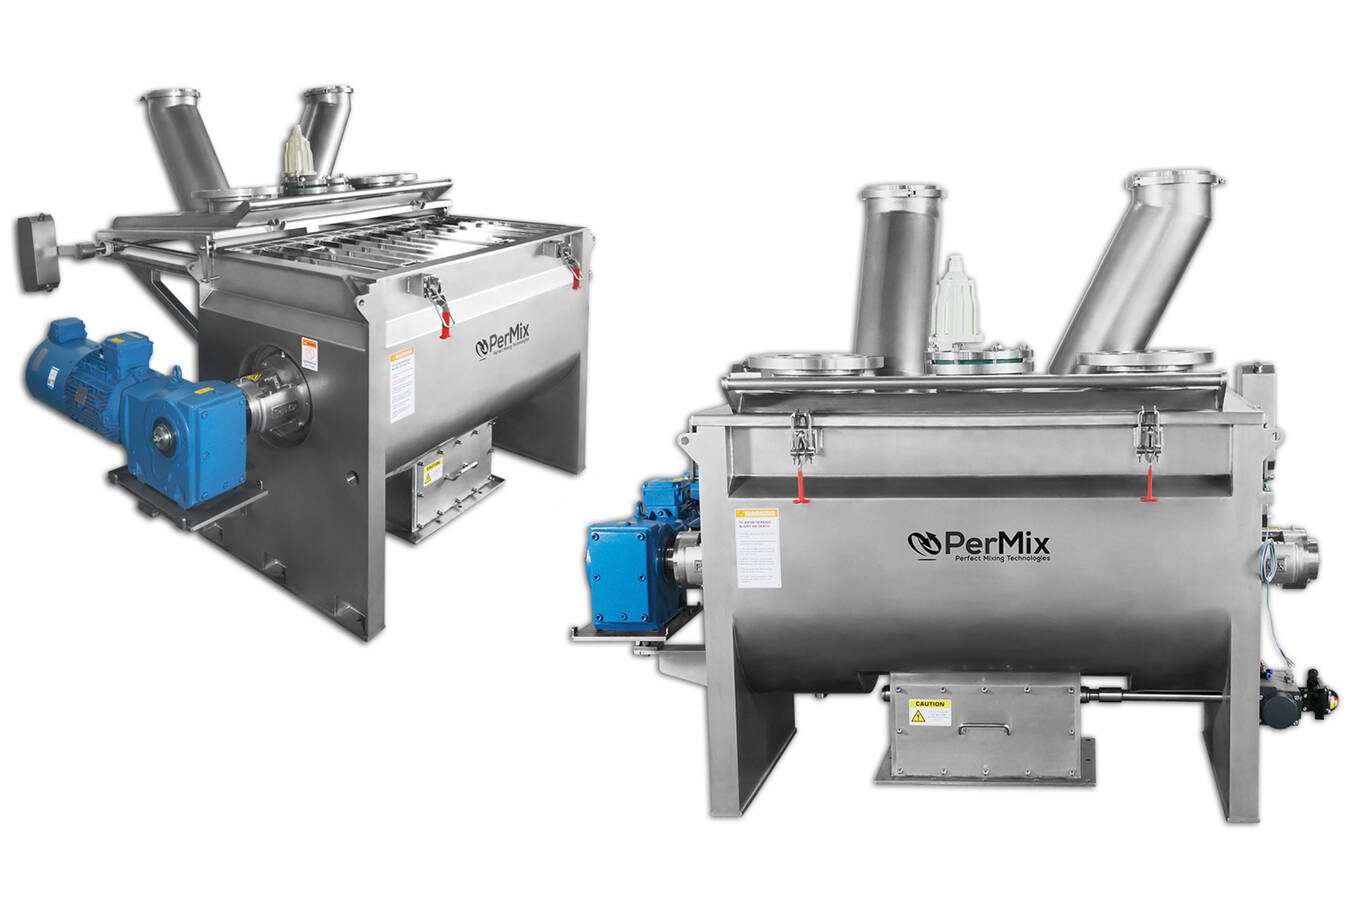 Ribbon mixers providing solutions in areas with low ceiling height Ribbon mixers that are designed to allow bulk ingredient feeding tubes to remain connected while allowing the ribbon mixer to be opened.  Come see the PerMix difference